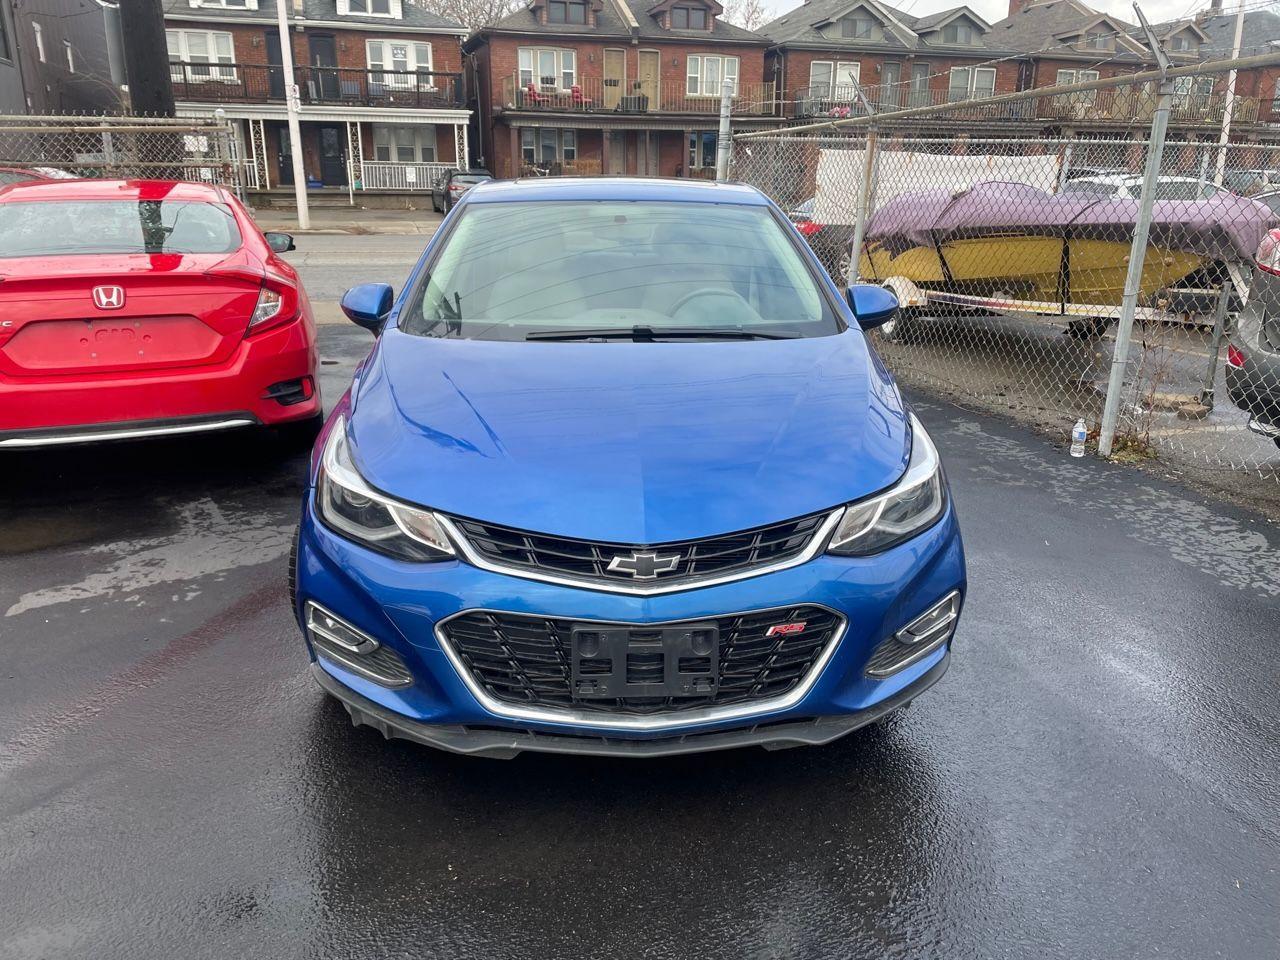 2018 Chevrolet Cruze LT *RS PACKAGE, BACKUP CAMERA, HEATED SEATS* - Photo #2